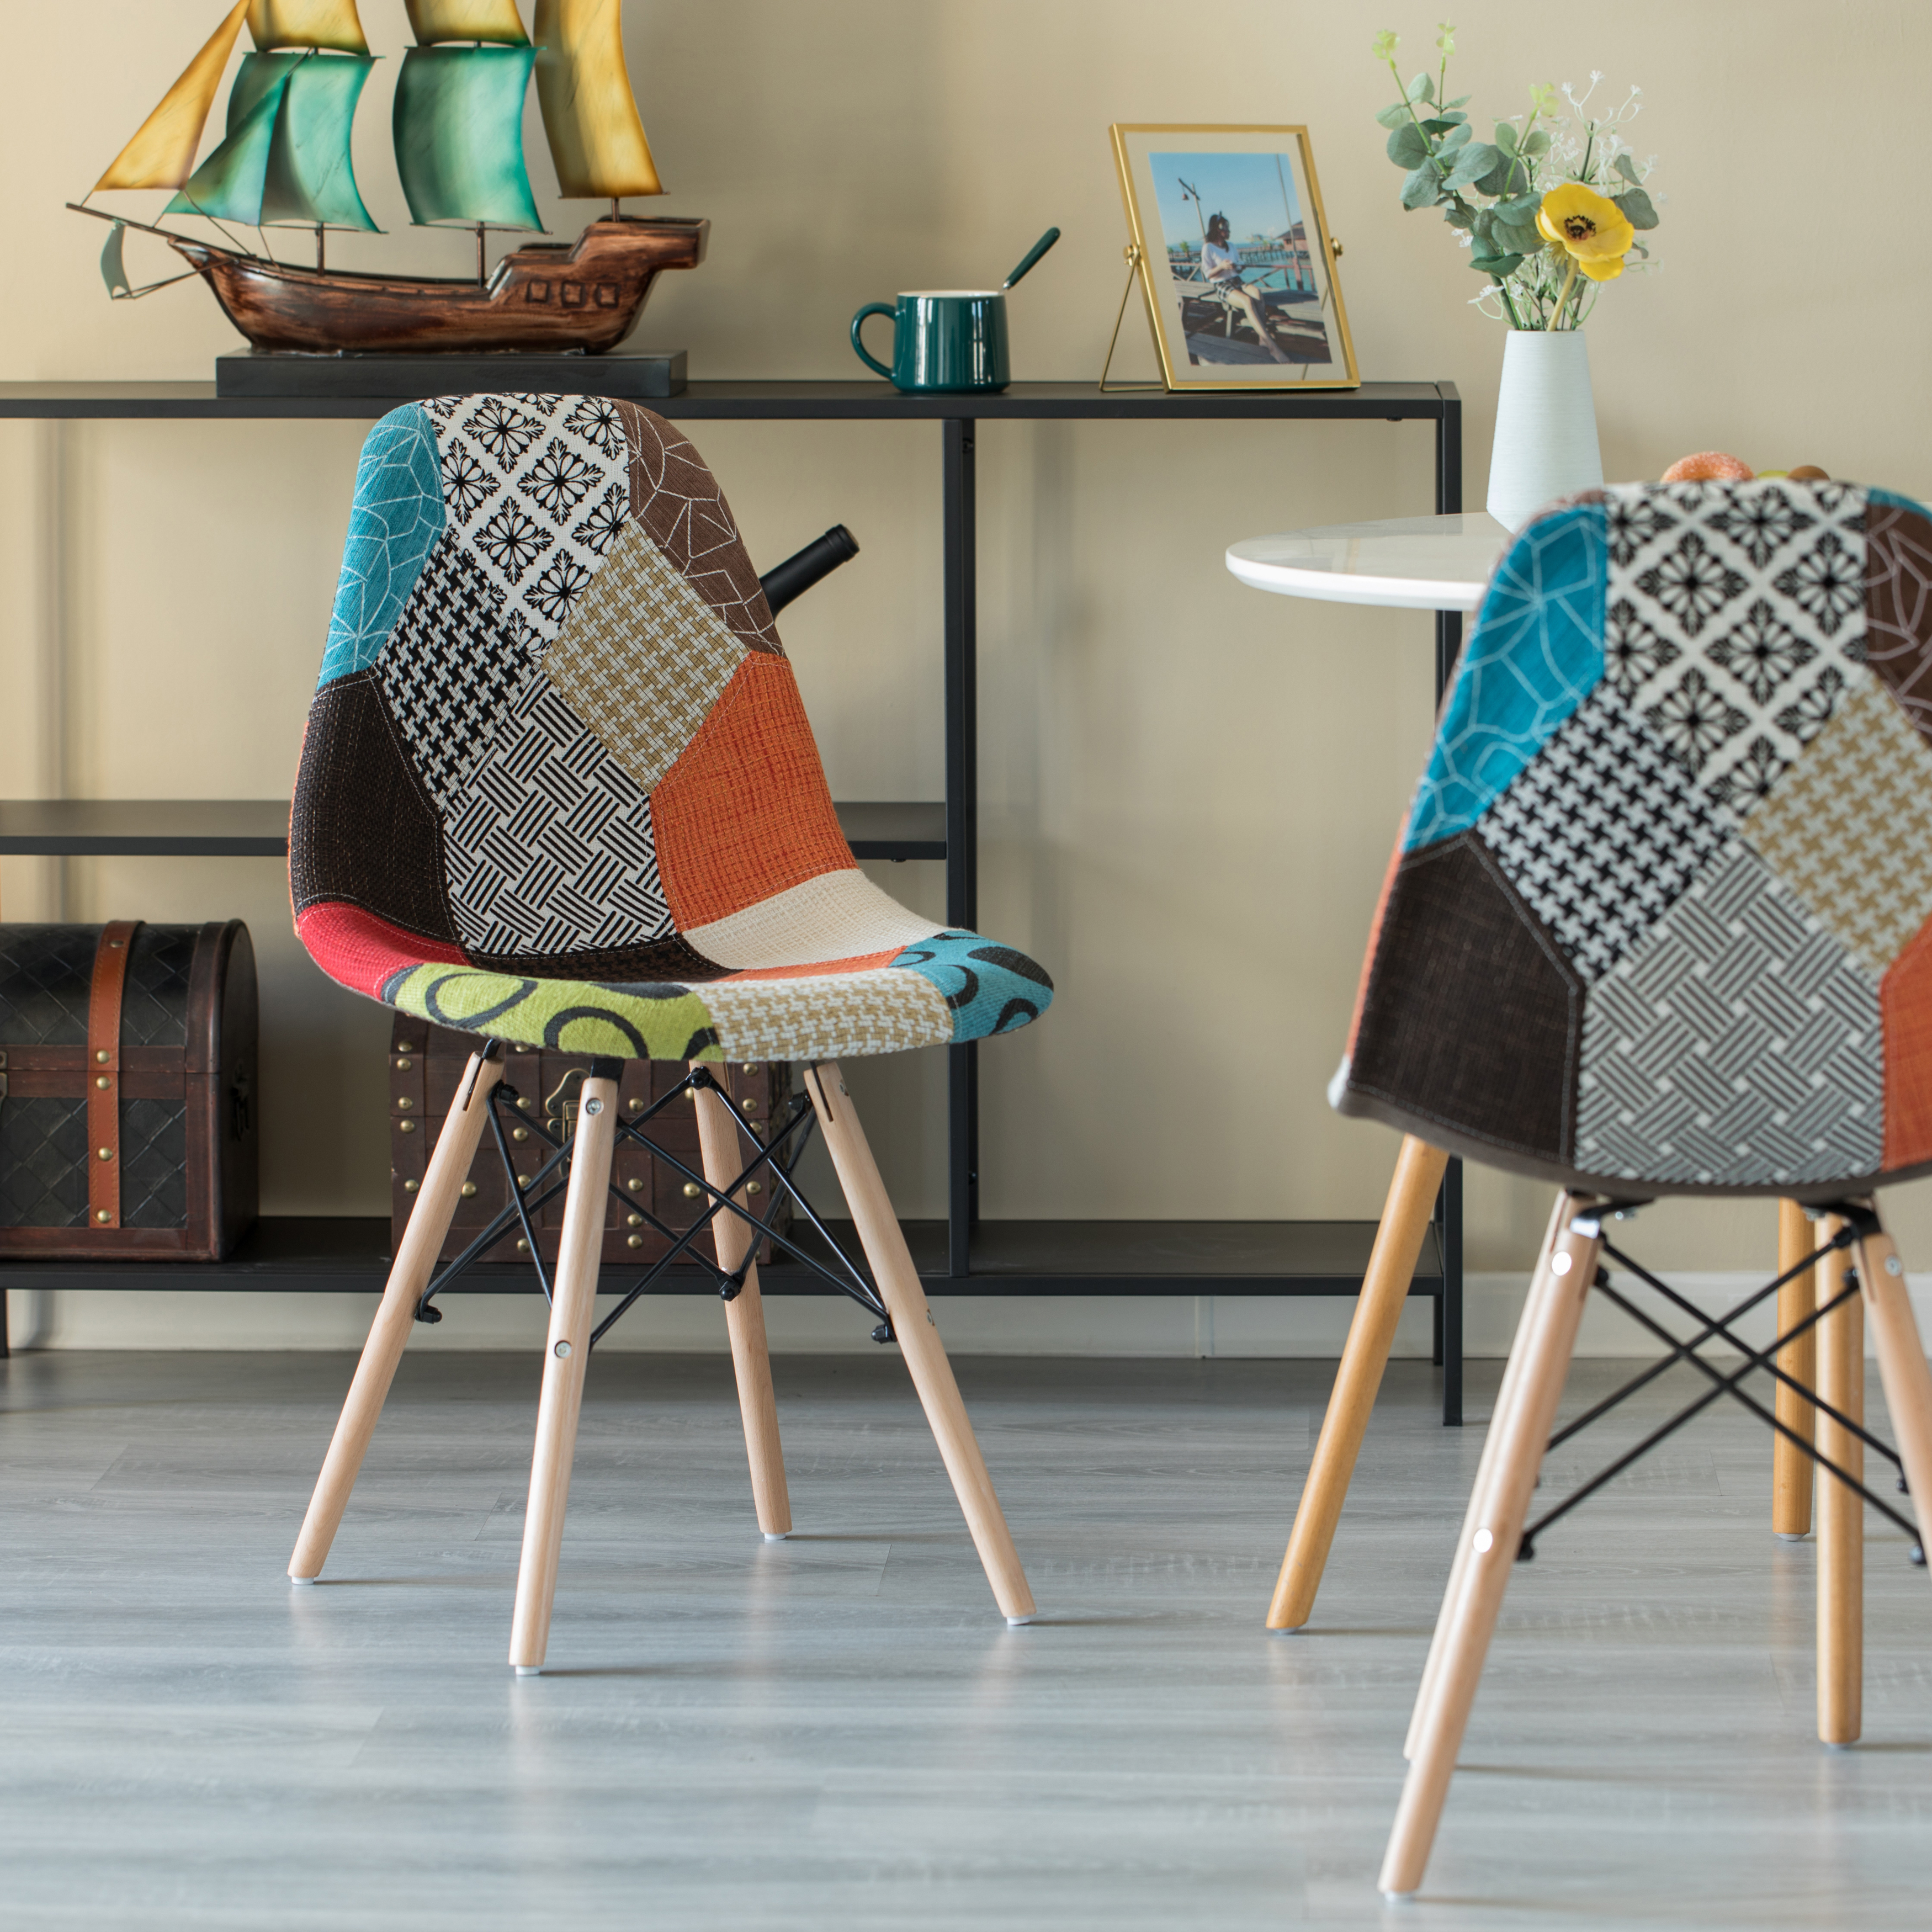 Modern Fabric Patchwork Chair With Wooden Legs For Kitchen, Dining Room, Entryway, Living Room - Single